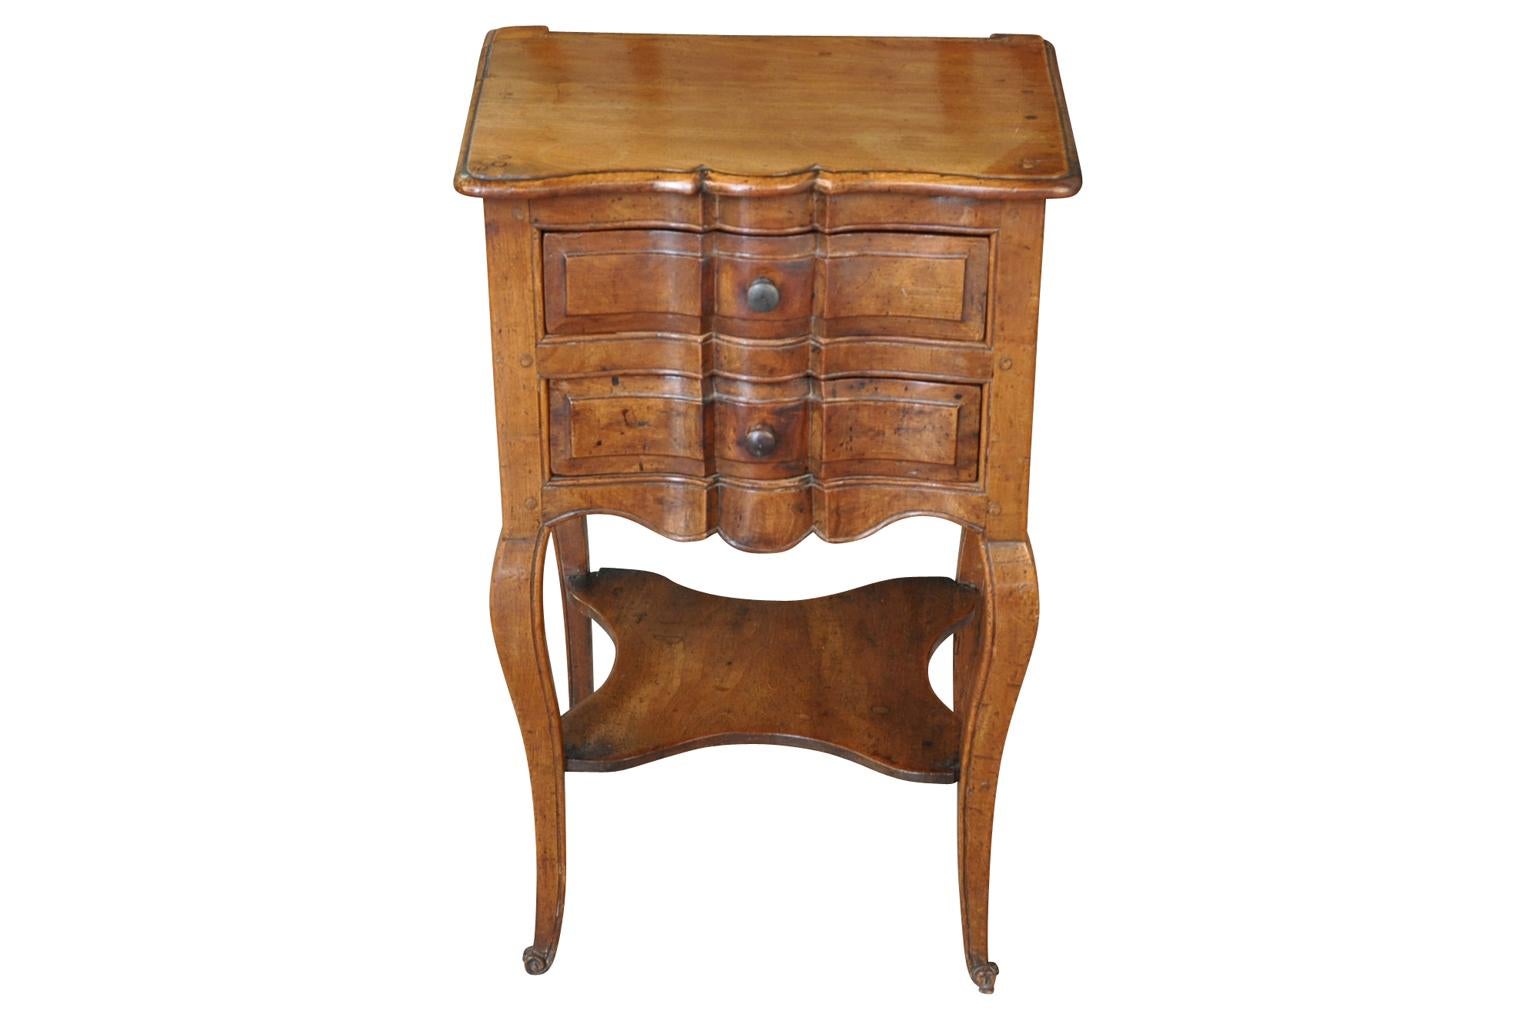 A very lovely 19th century side table from the Provence region of France. Wonderfully constructed from walnut with exceptional patina - rich and luminous.